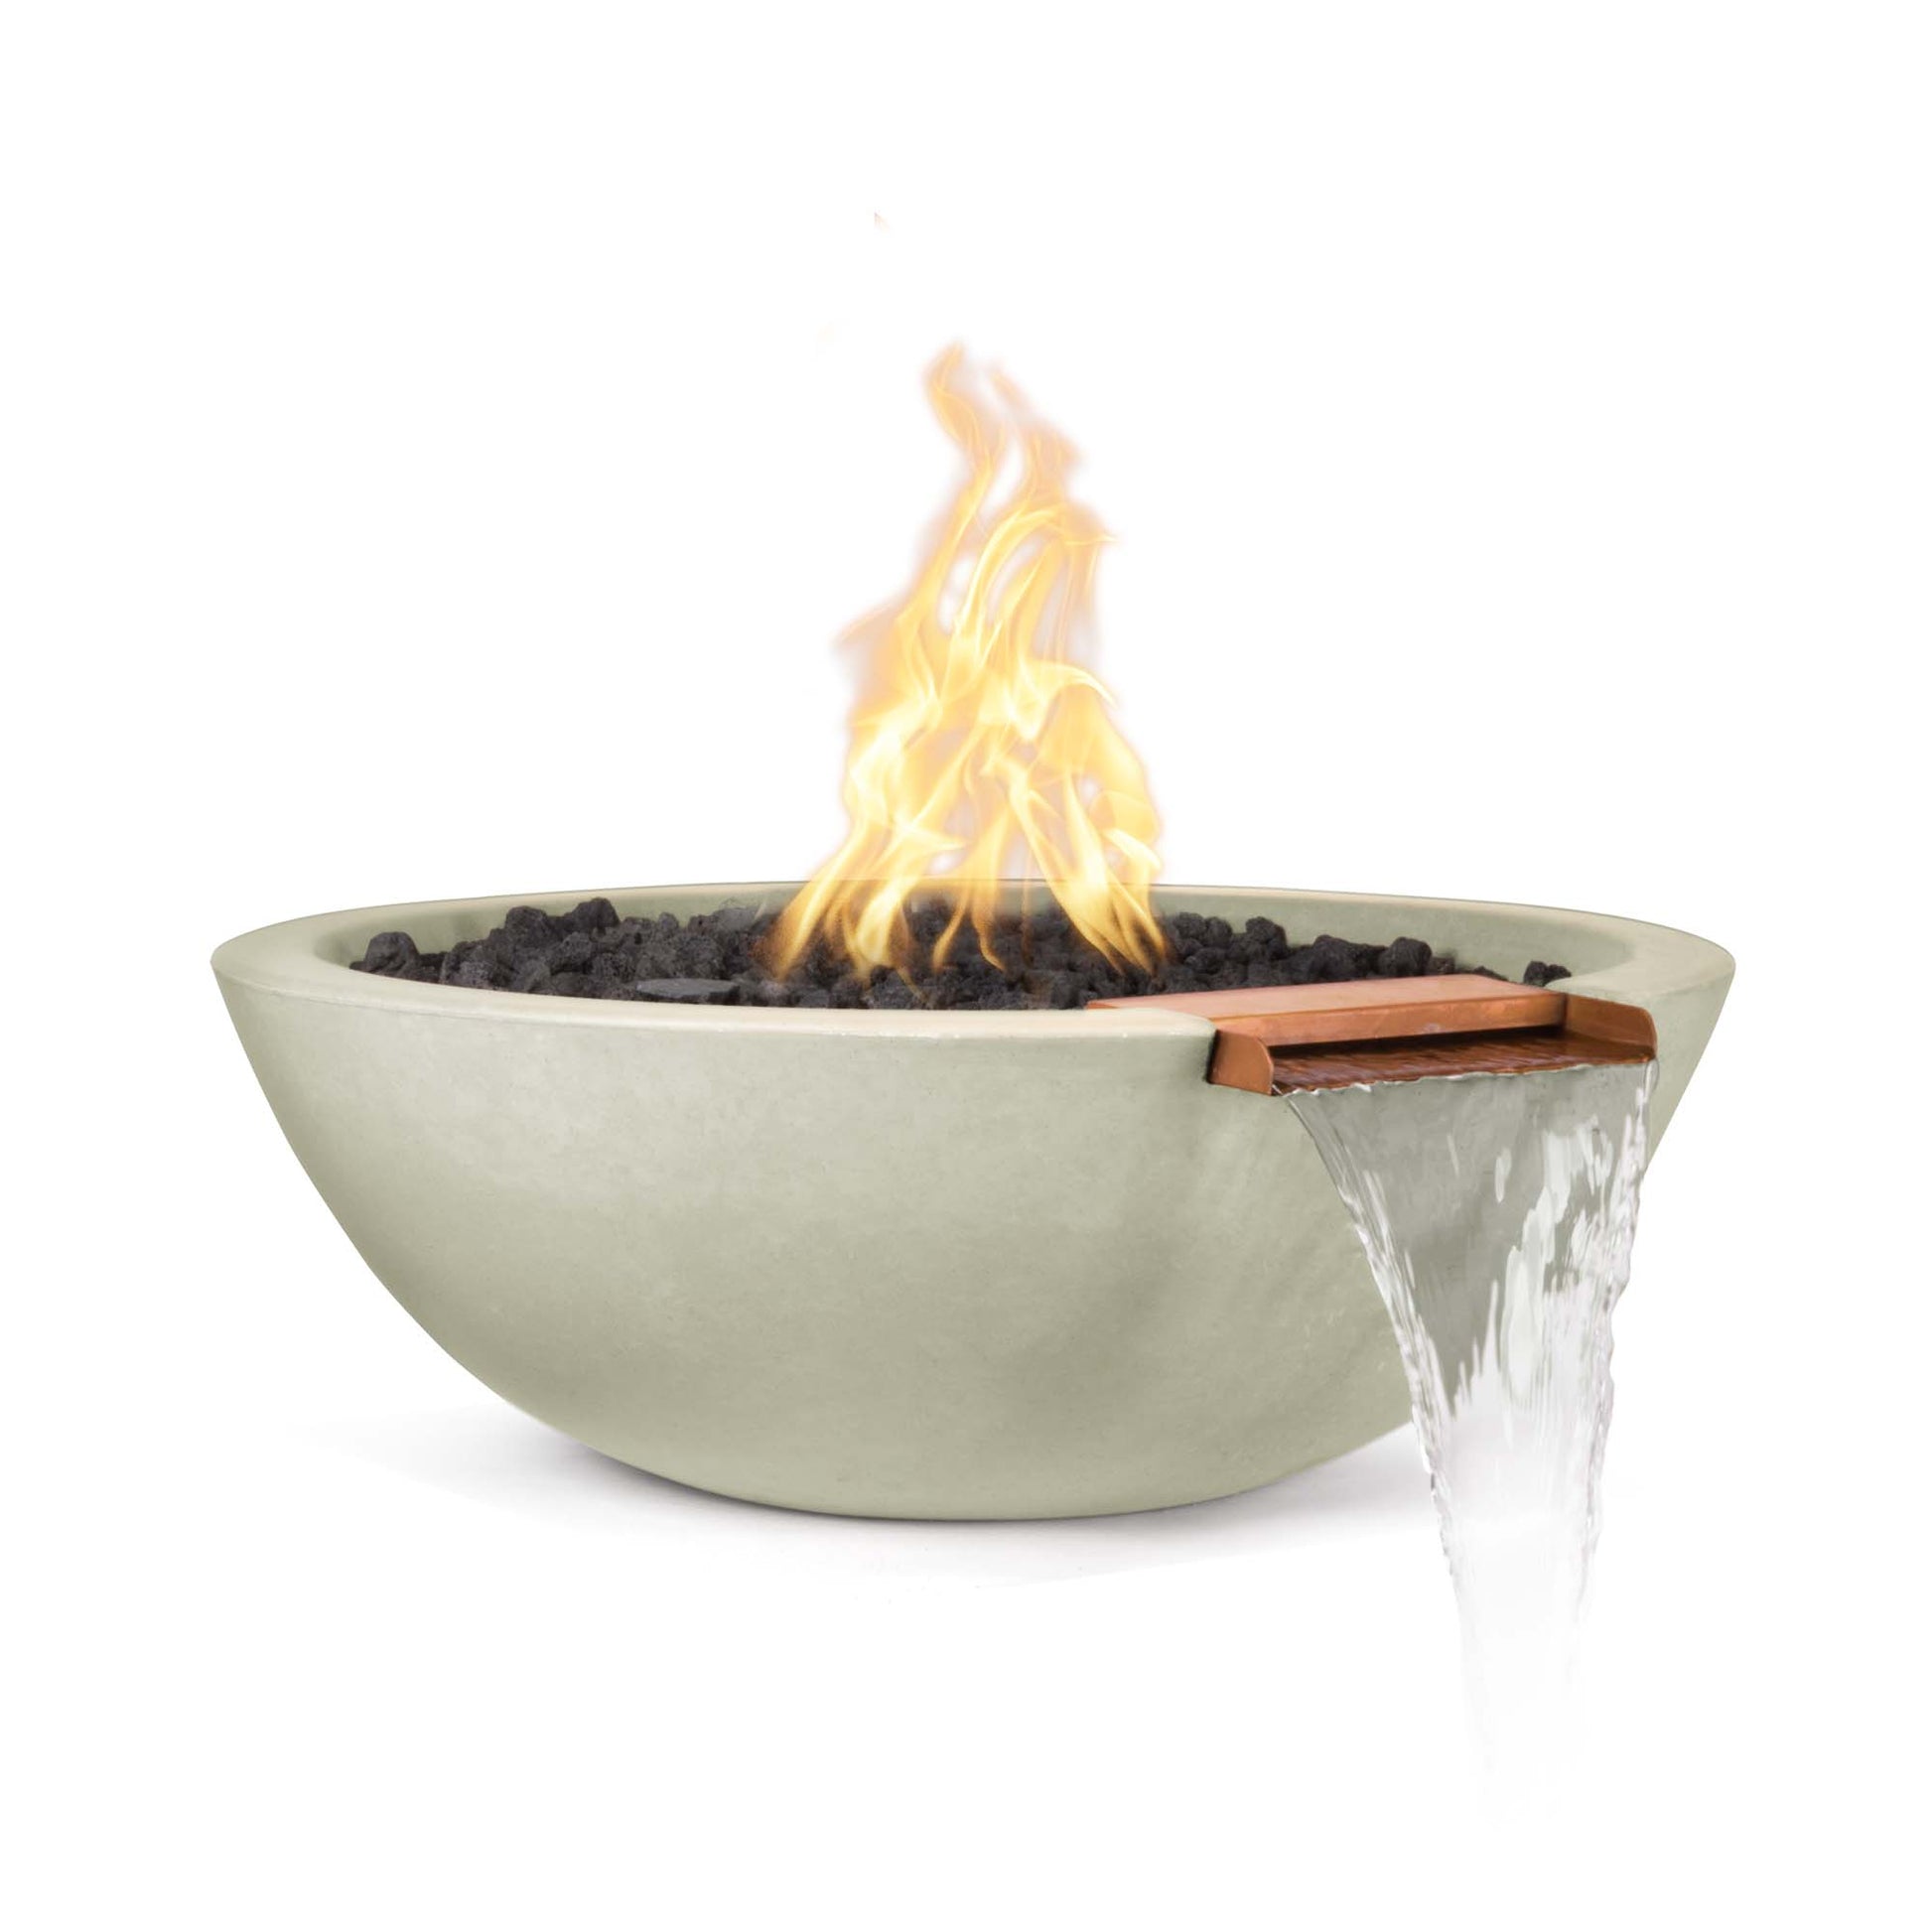 The Outdoor Plus Round Sedona 27" Metallic Slate GFRC Concrete Liquid Propane Fire & Water Bowl with Match Lit with Flame Sense Ignition